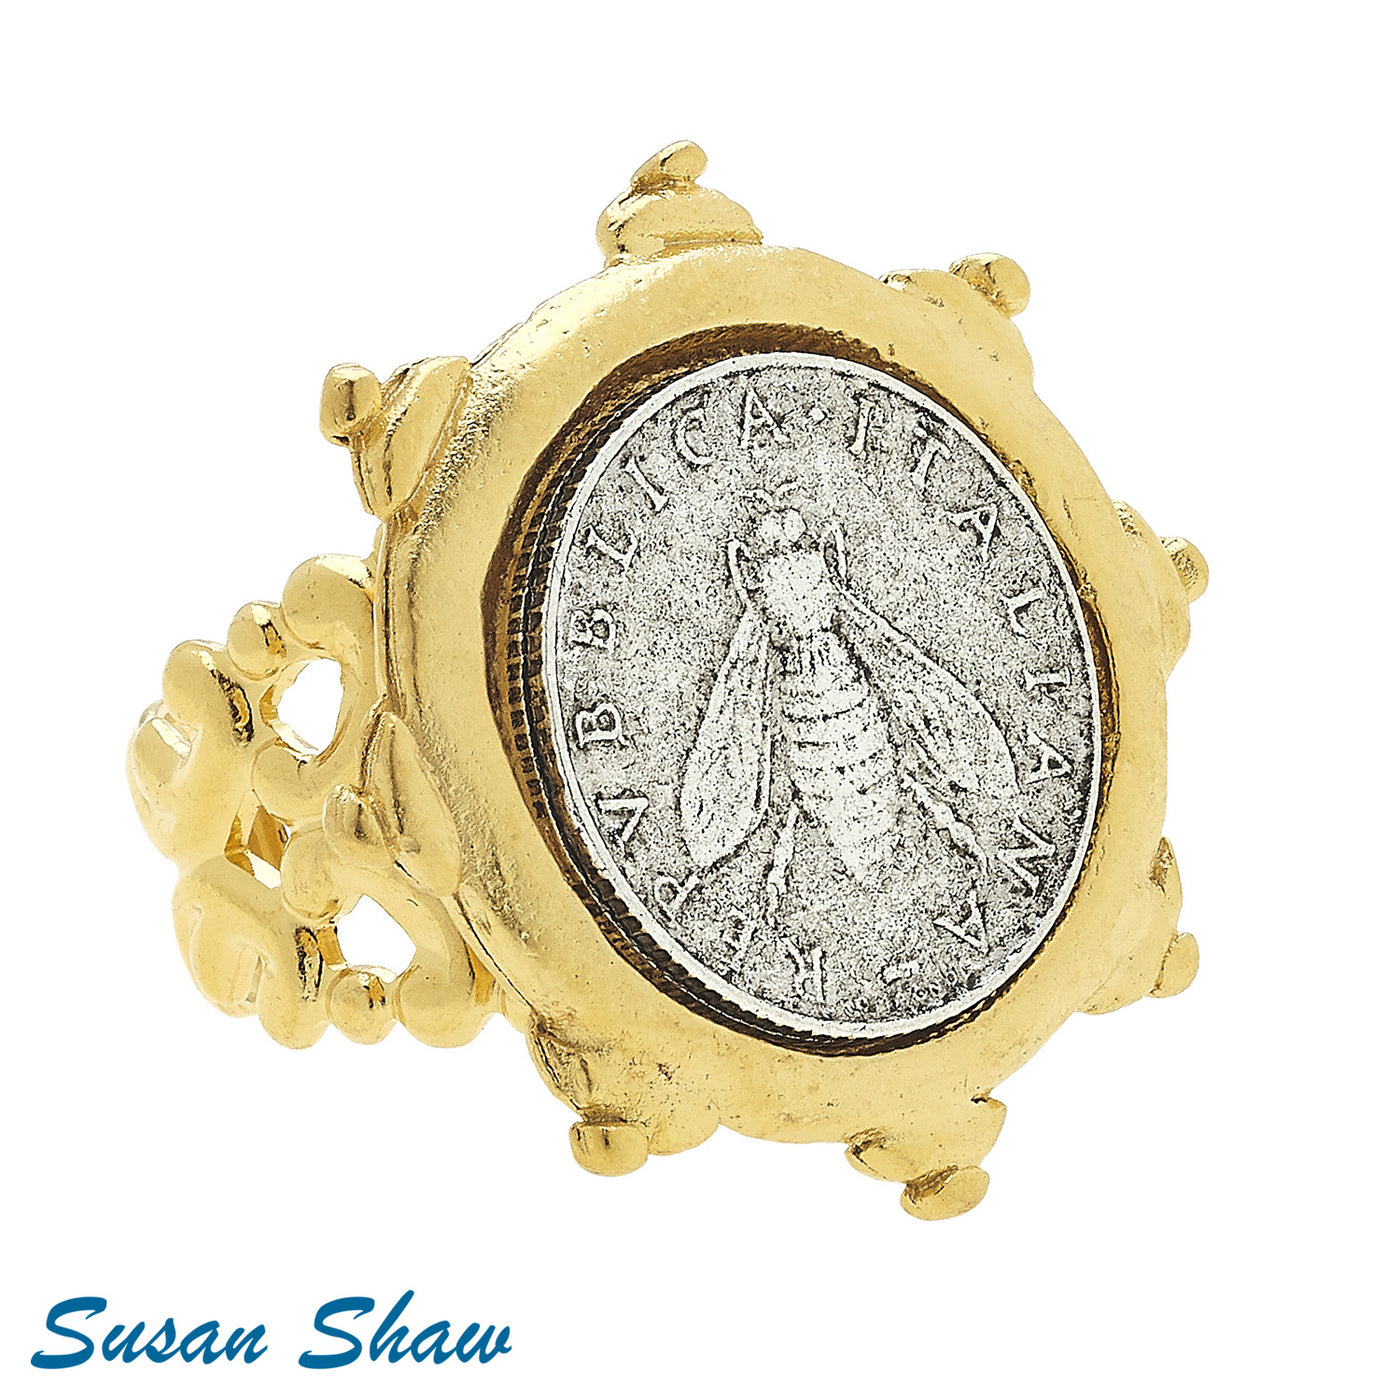 Florence Italian Bee Coin Ring